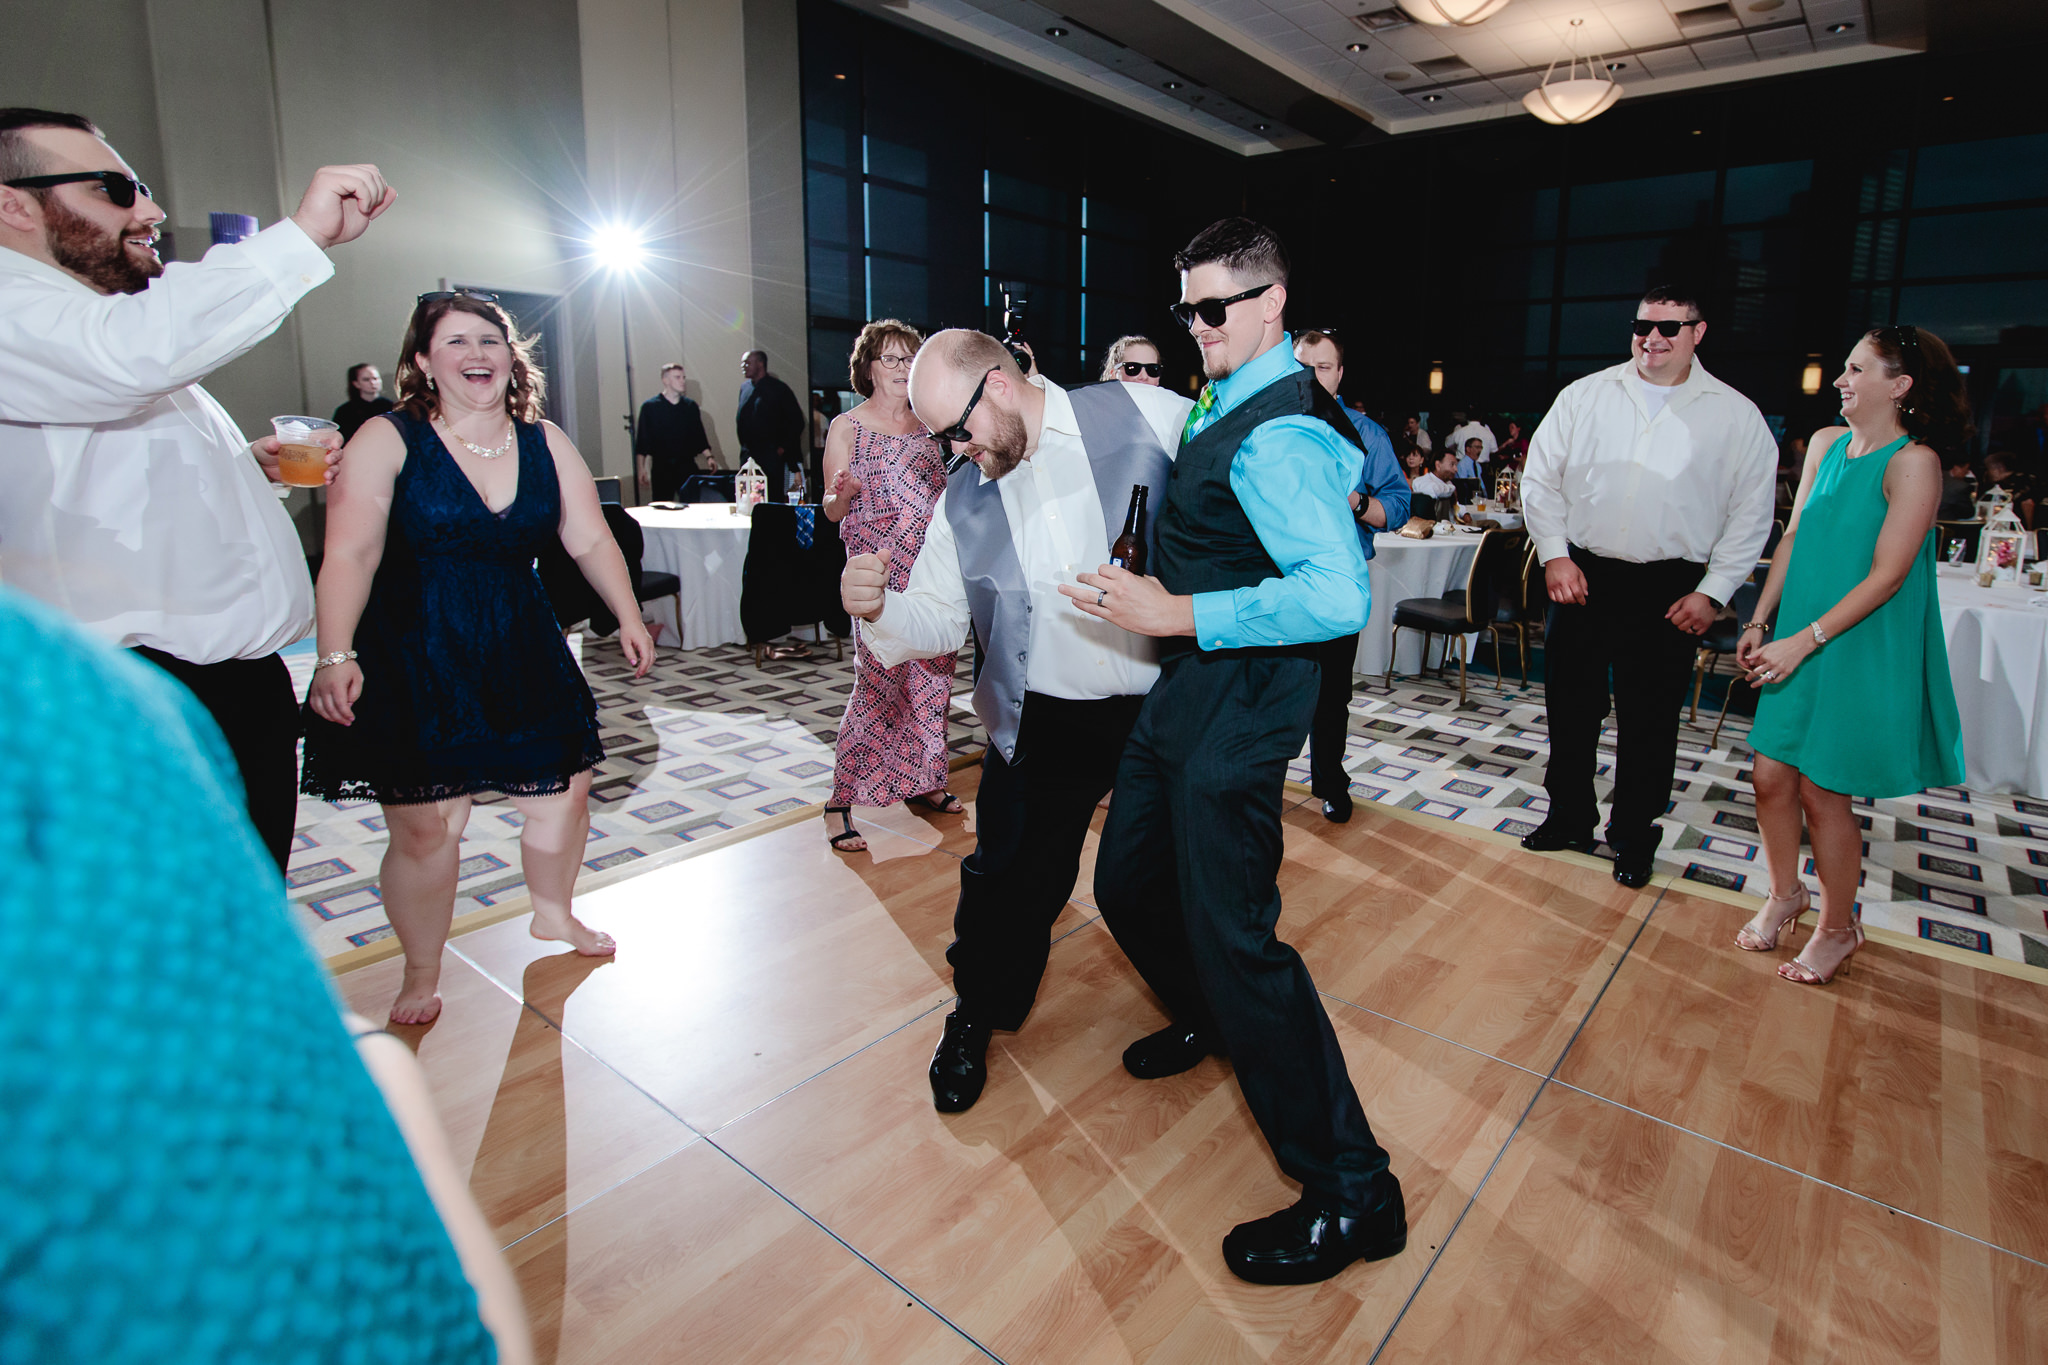 Groomsman dances with a guest at Duquesne University